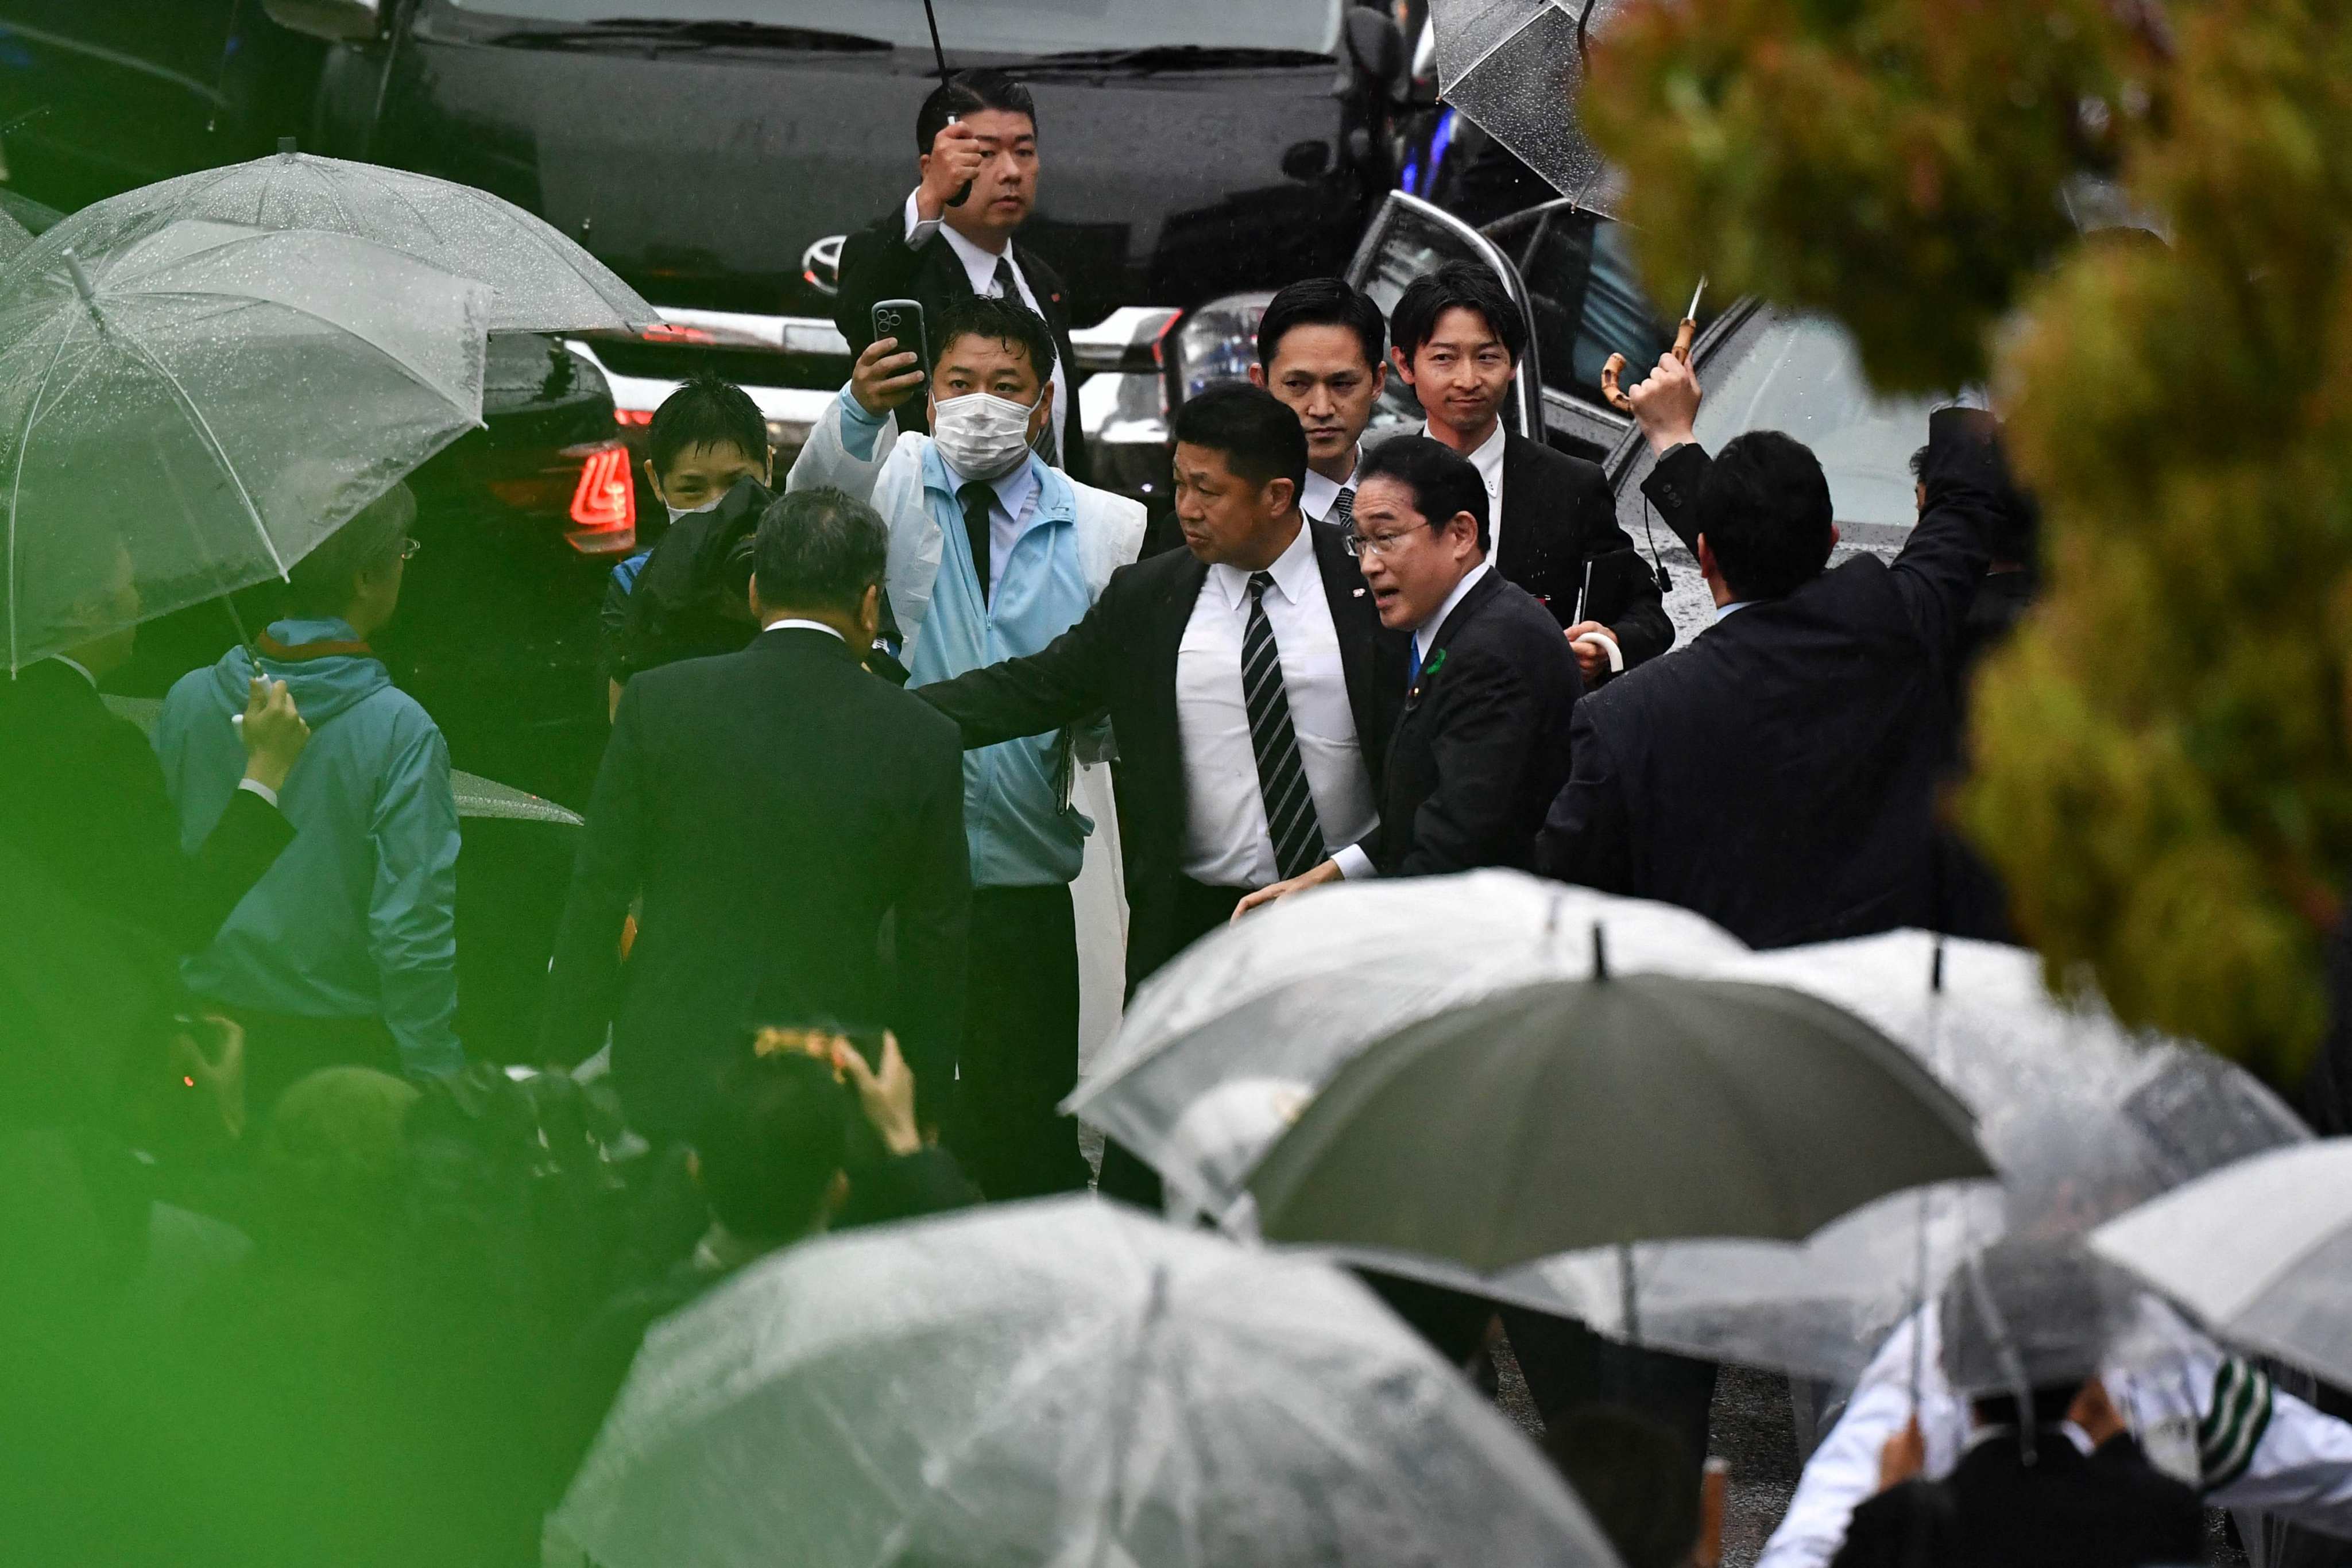 Japan’s Prime Minister Fumio Kishida is escorted by security officers at an election campaign event in Chiba prefecture on Saturday, hours after being evacuated unharmed from the scene of an apparent “smoke bomb” blast at another event earlier that day. Photo: AFP